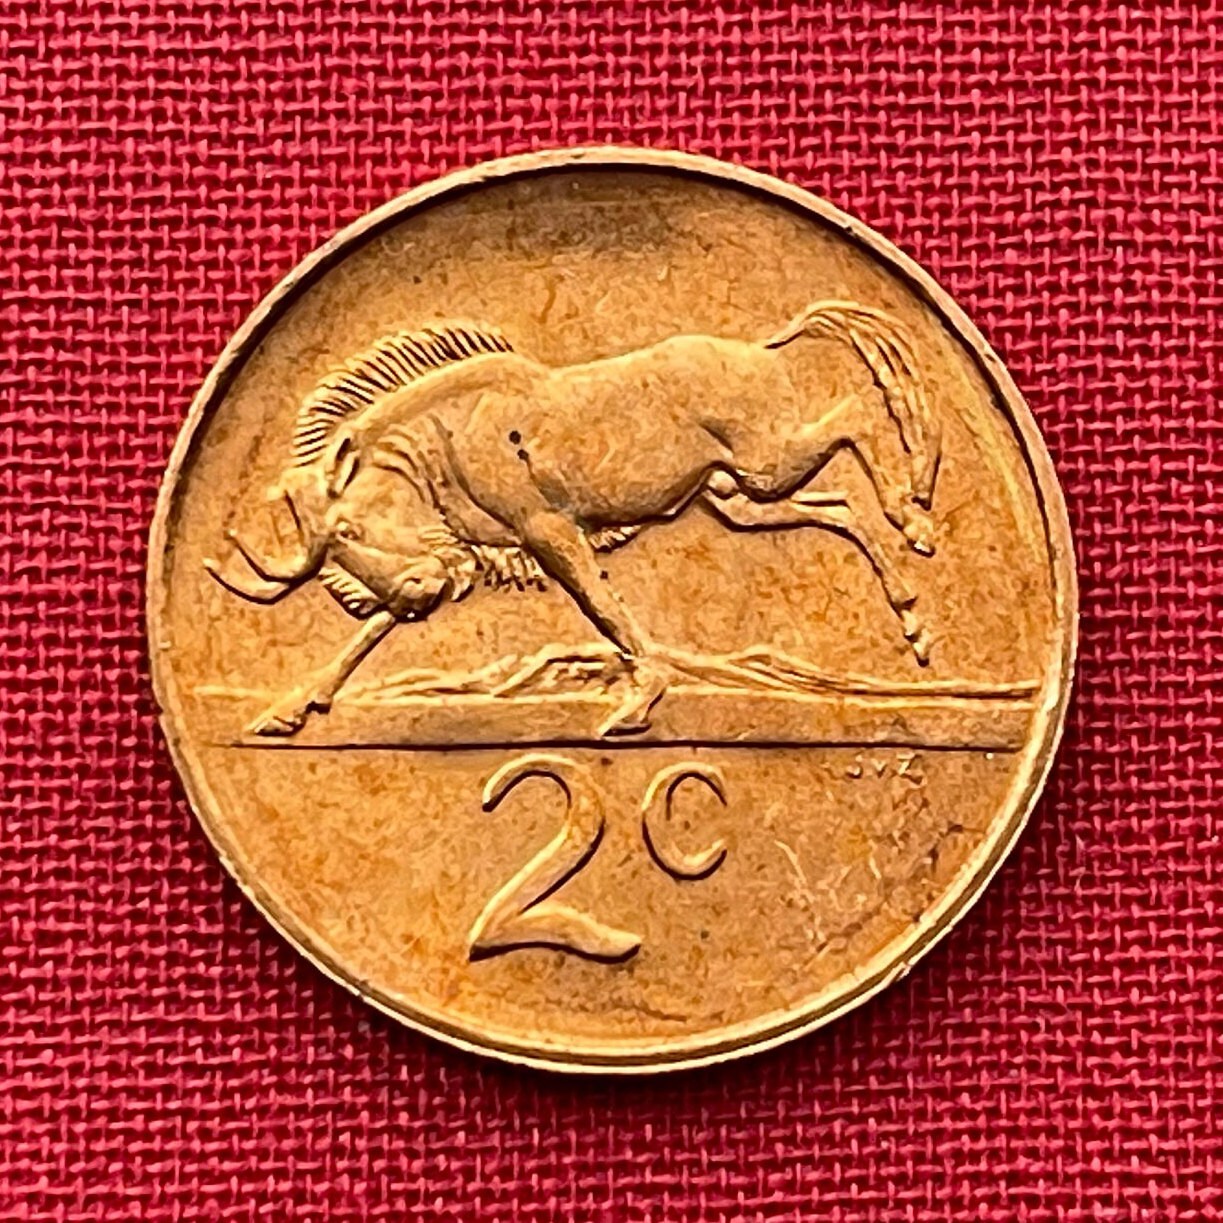 Wildebeest Gnu 2 Cents South Africa Authentic Coin Money for Jewelry and Craft Making (Antelope) (African Wildlife)